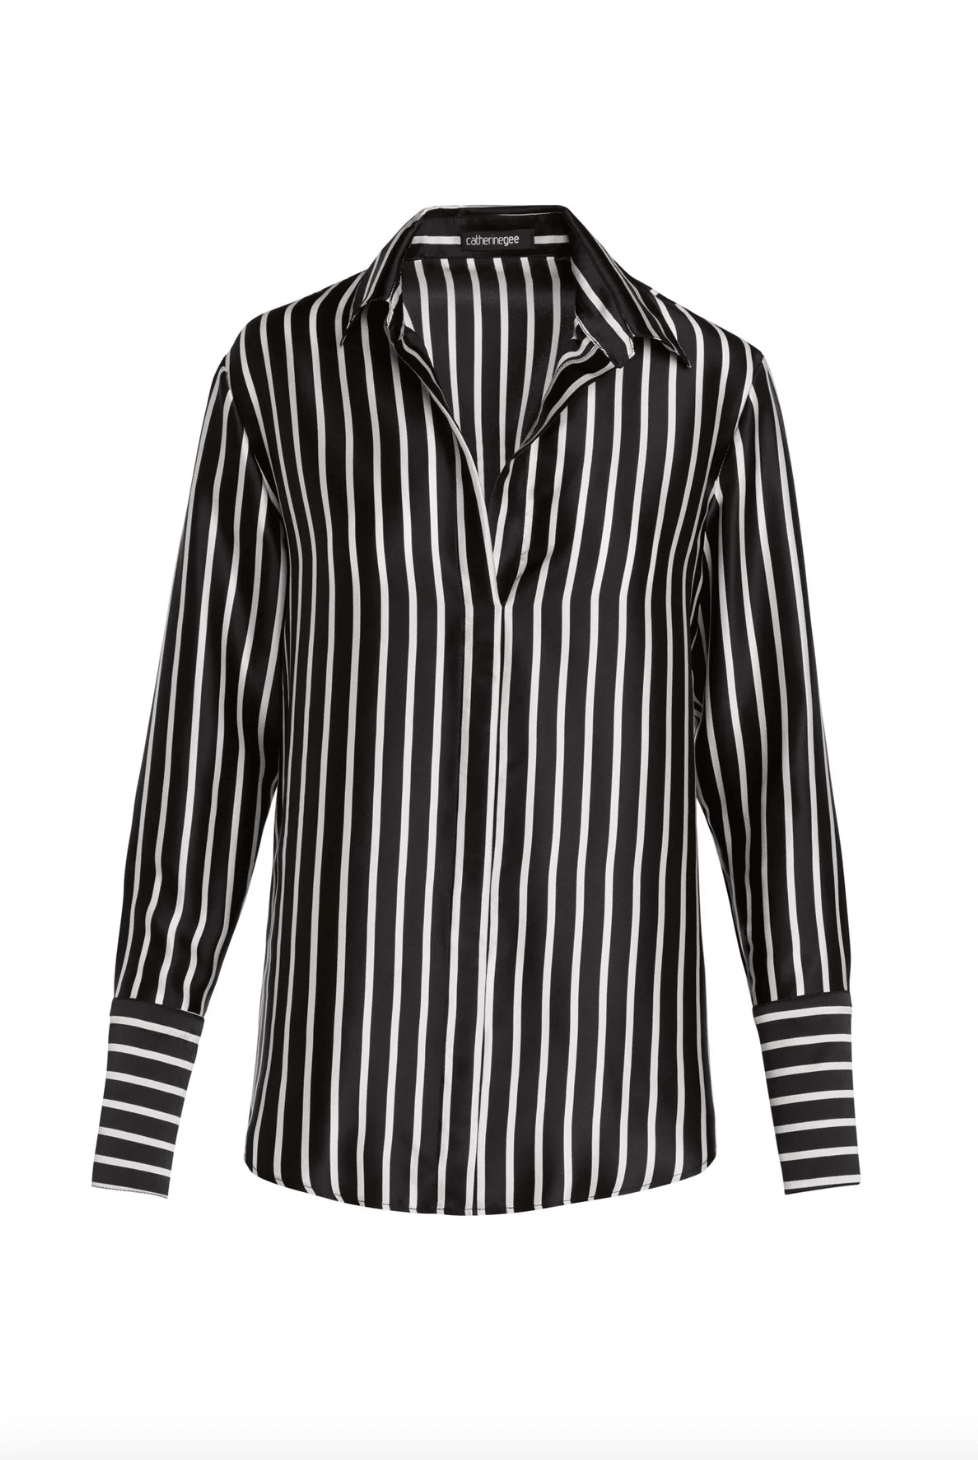 Daria Blouse in Black Stripe by Catherine Gee - Haven